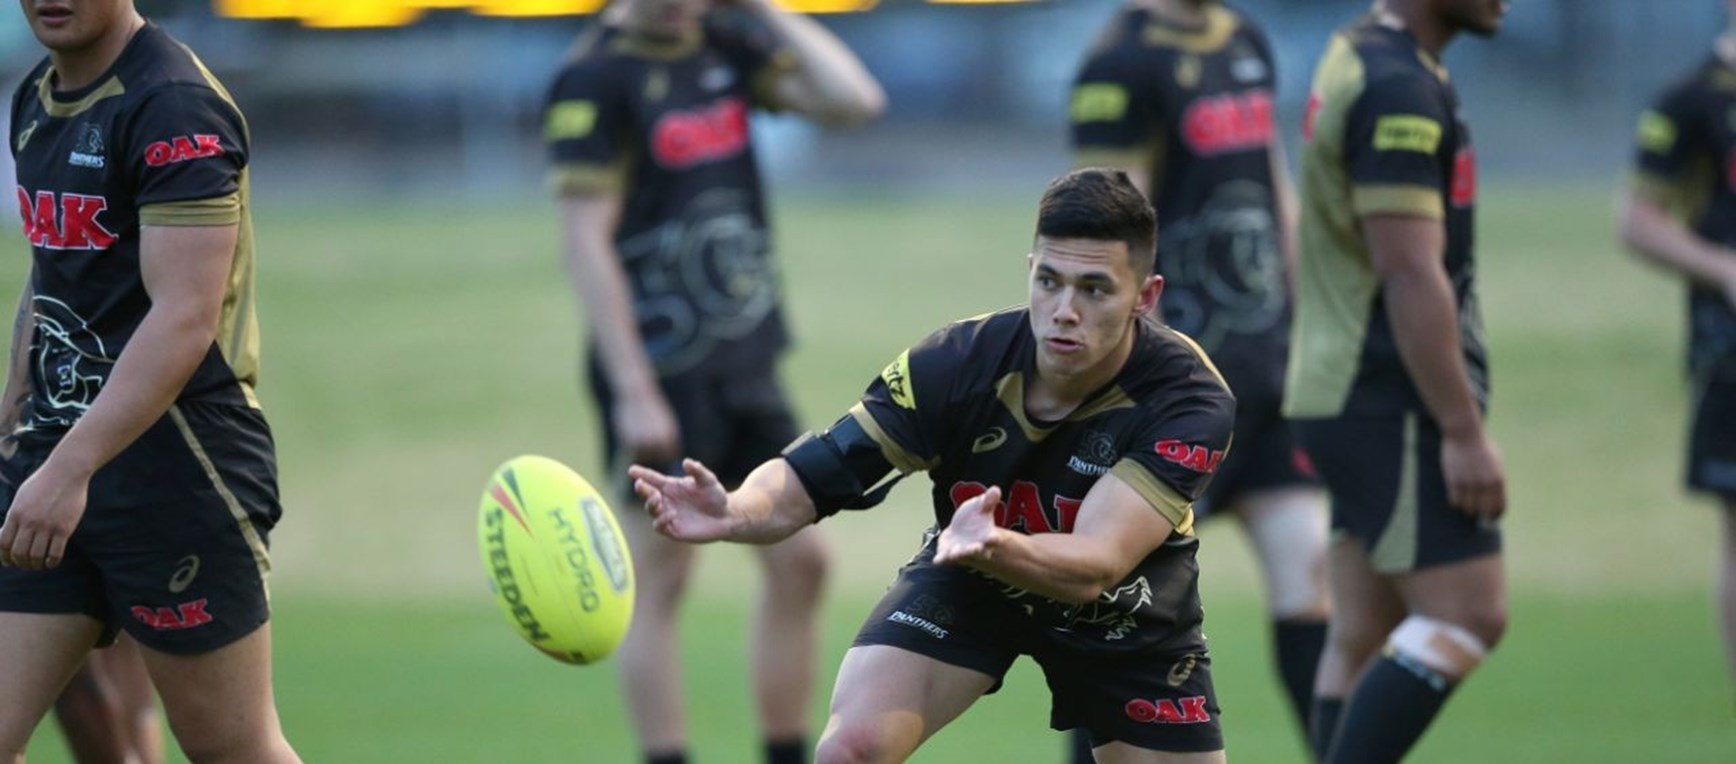 Gallery: Young Panthers training